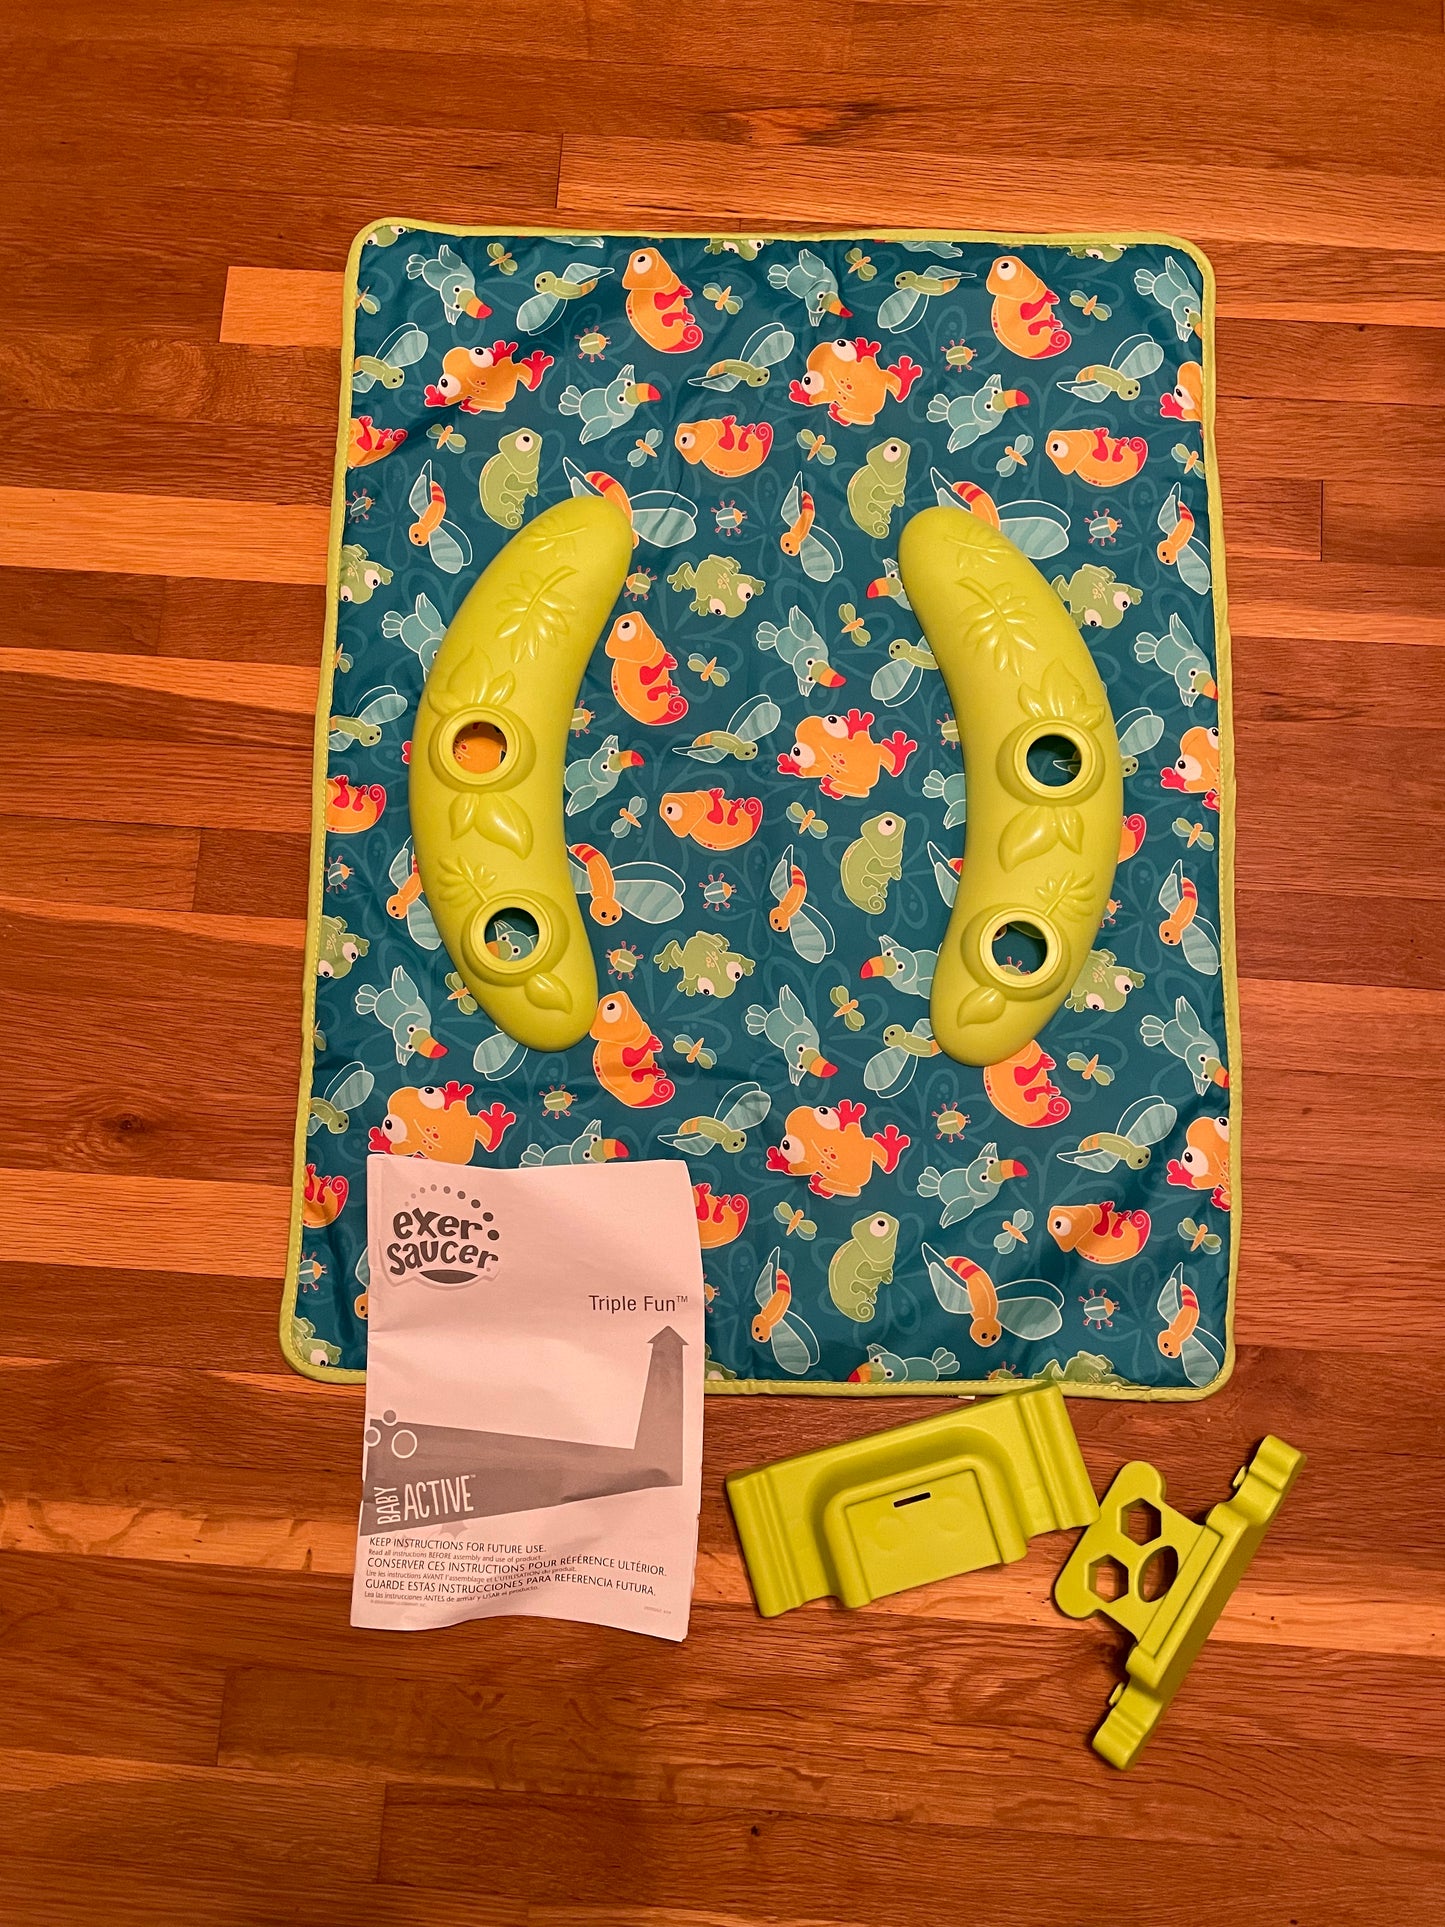 Exersaucer, also converts to play mat and play table